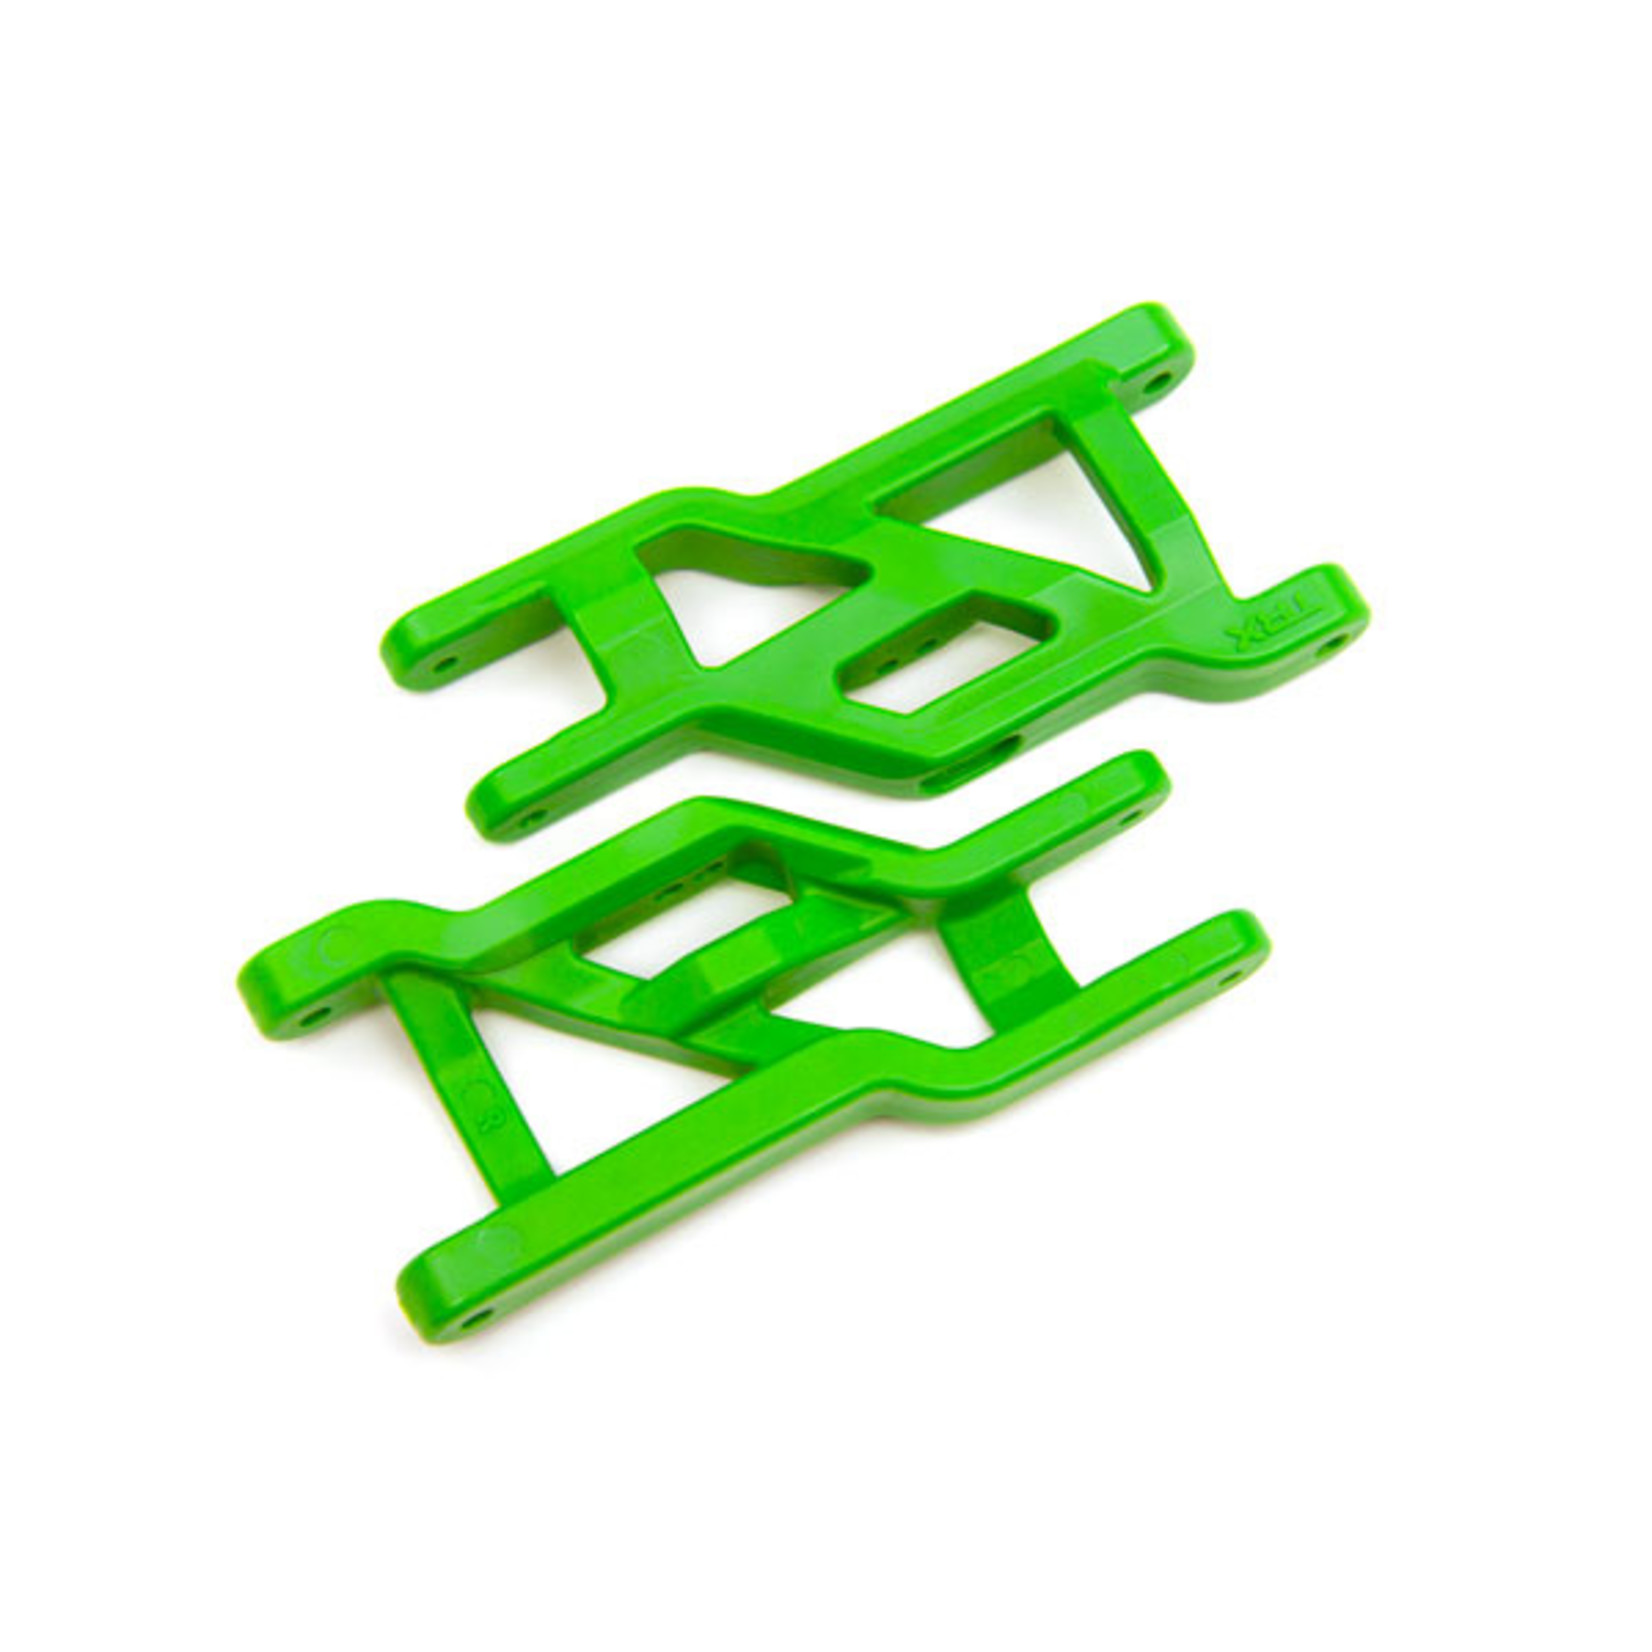 Traxxas 3631G - Suspension arms, green, front, heavy duty